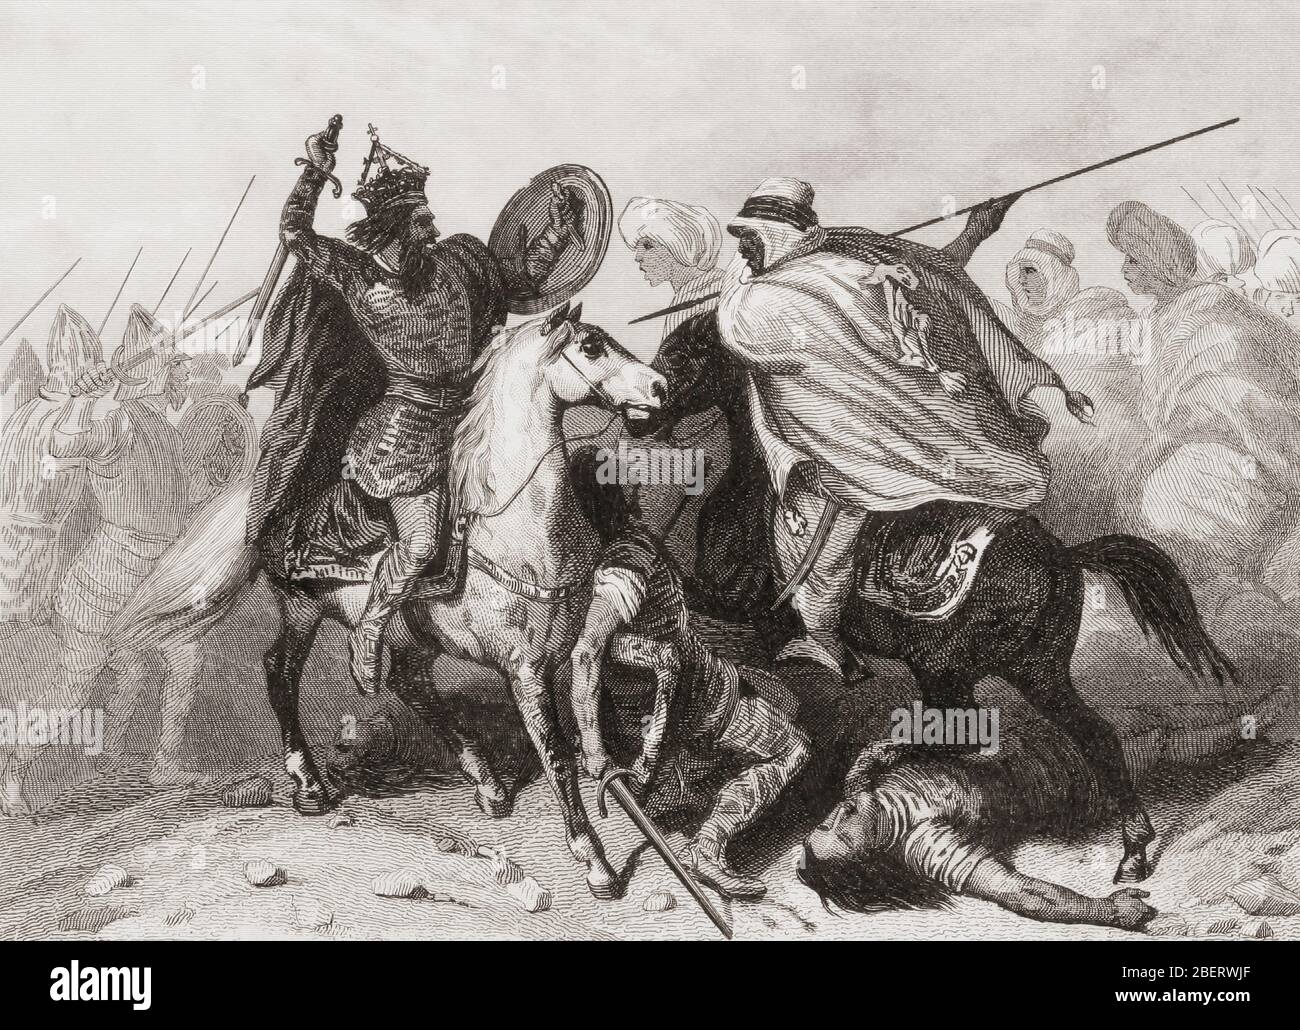 The Battle of Guadalete,  711 AD.  The Muslim Umayyad Caliphate, defeated the Christian Visigoths.  From Las Glorias Nacionales, published in Madrid and Barcelona, 1852.  The picture shows King Roderic fighting a Muslim soldier. Stock Photo